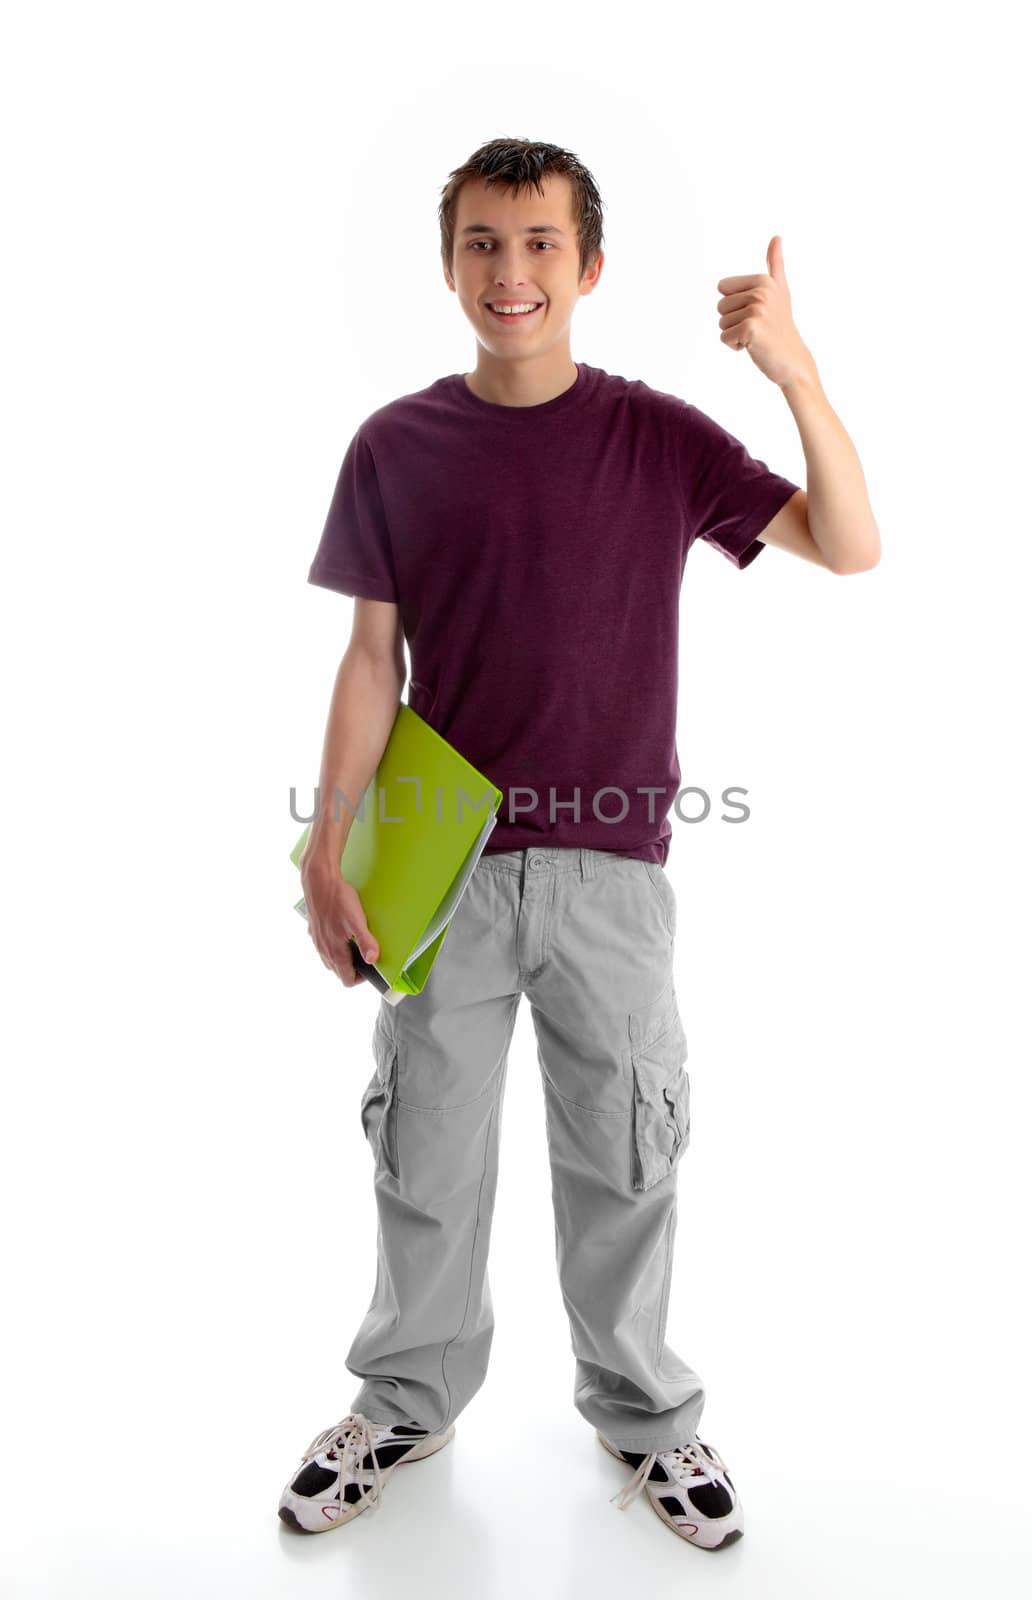 A happy male teen dressed in cargoes and maroon marle t-shirt, is carrying a lime green folder in one hand and showing thumbs up success or approval hand sign in the other.  White background.